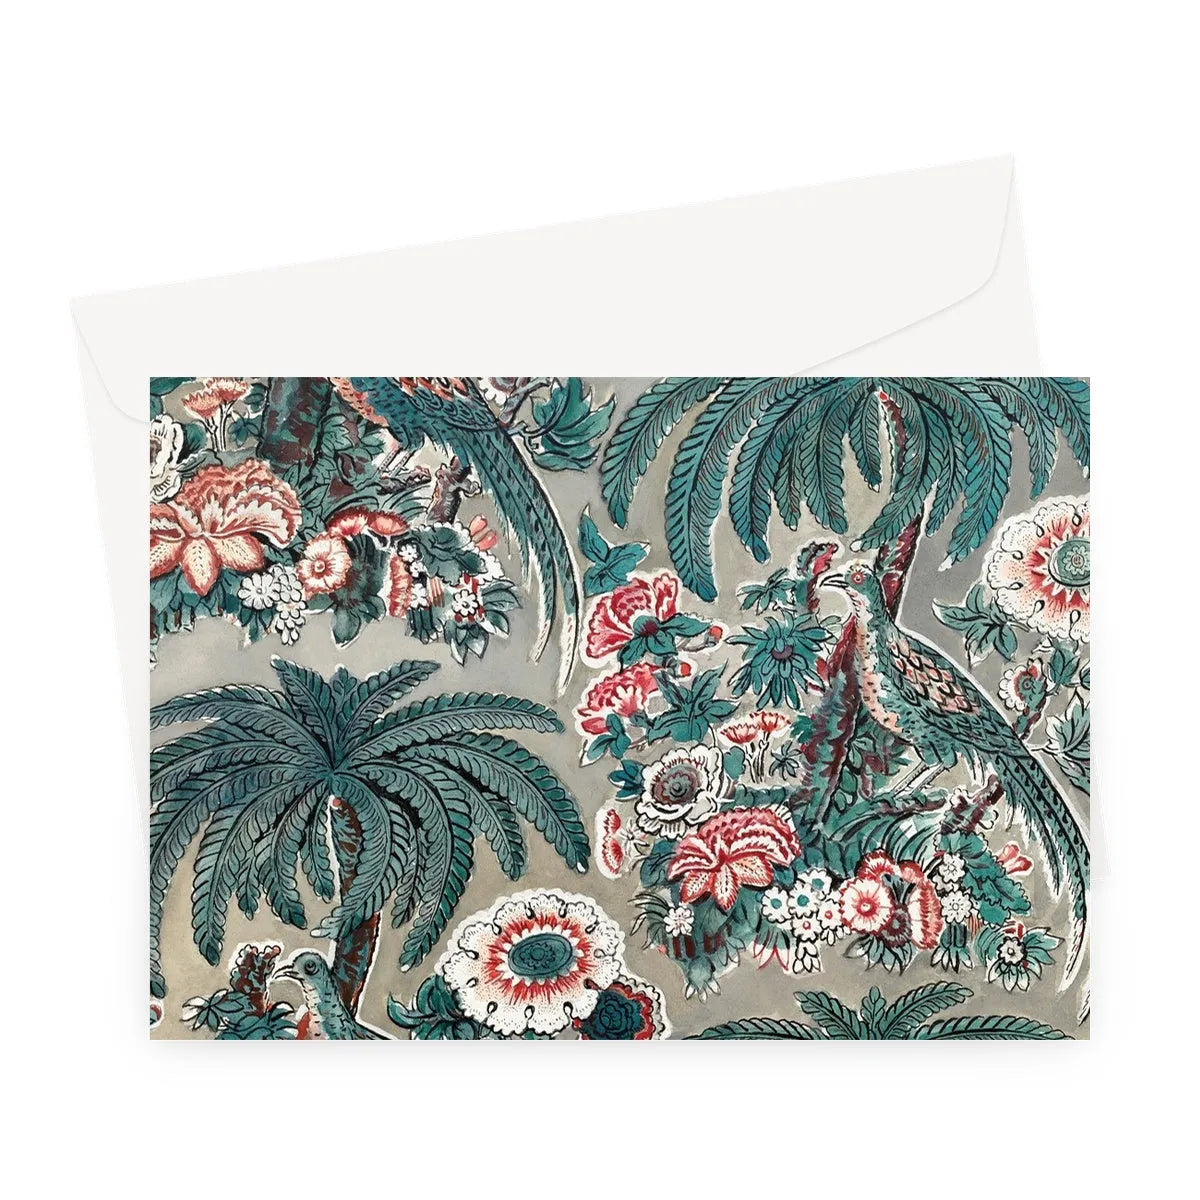 Chintz By George Loughridge Greeting Card - A5 Landscape / 1 Card - Greeting & Note Cards - Aesthetic Art